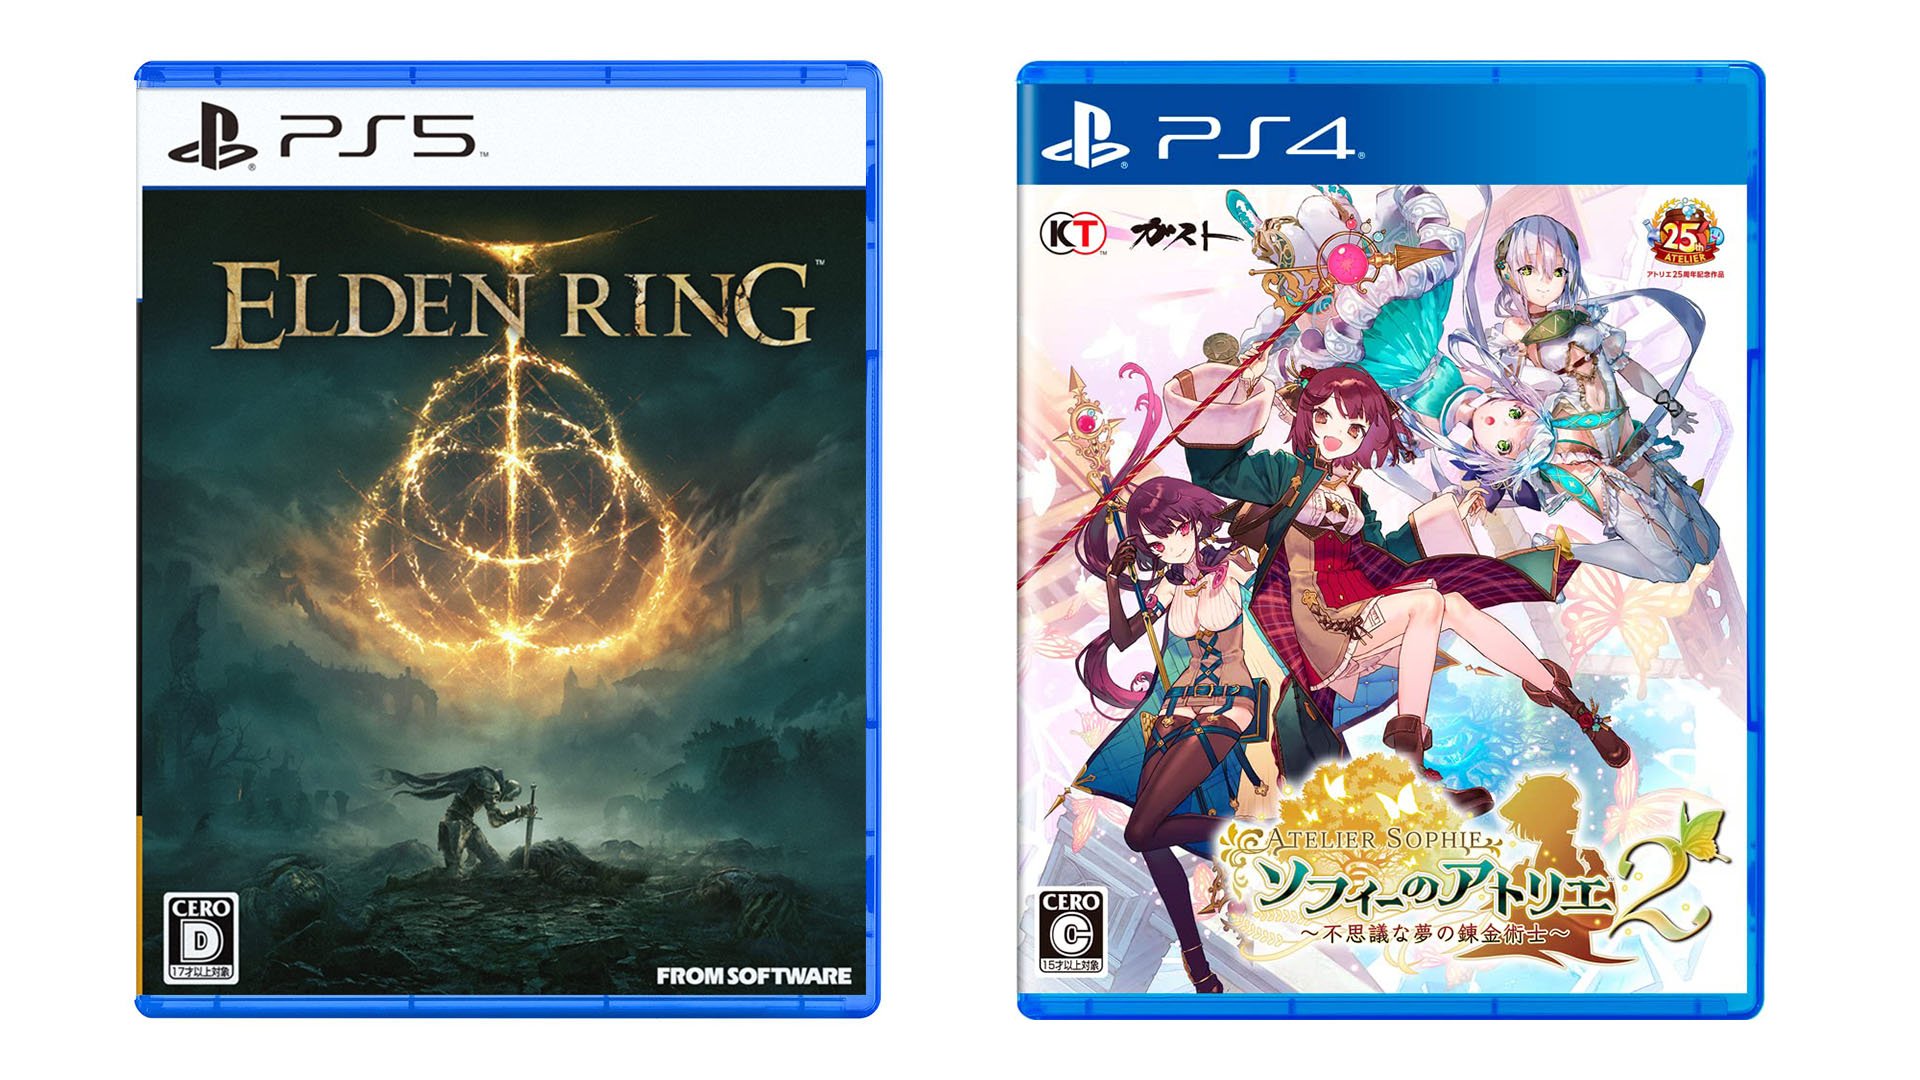 This Week's Japanese Game Releases: Elden Ring, Atelier Sophie 2: The  Alchemist of the Mysterious Dream, more - Gematsu